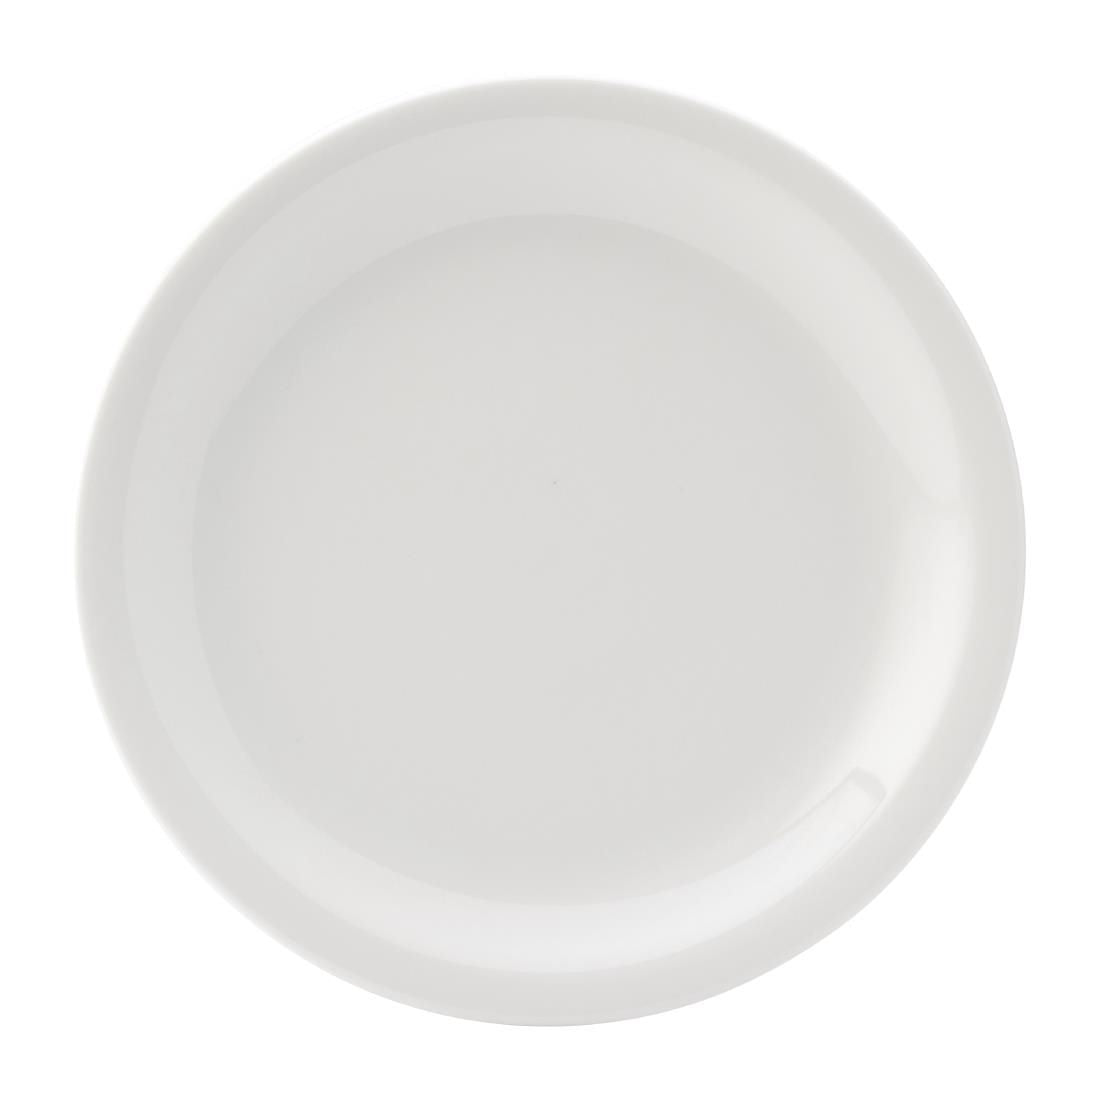 DY317 Utopia Titan Narrow Rimmed Plates White 220mm (Pack of 24)